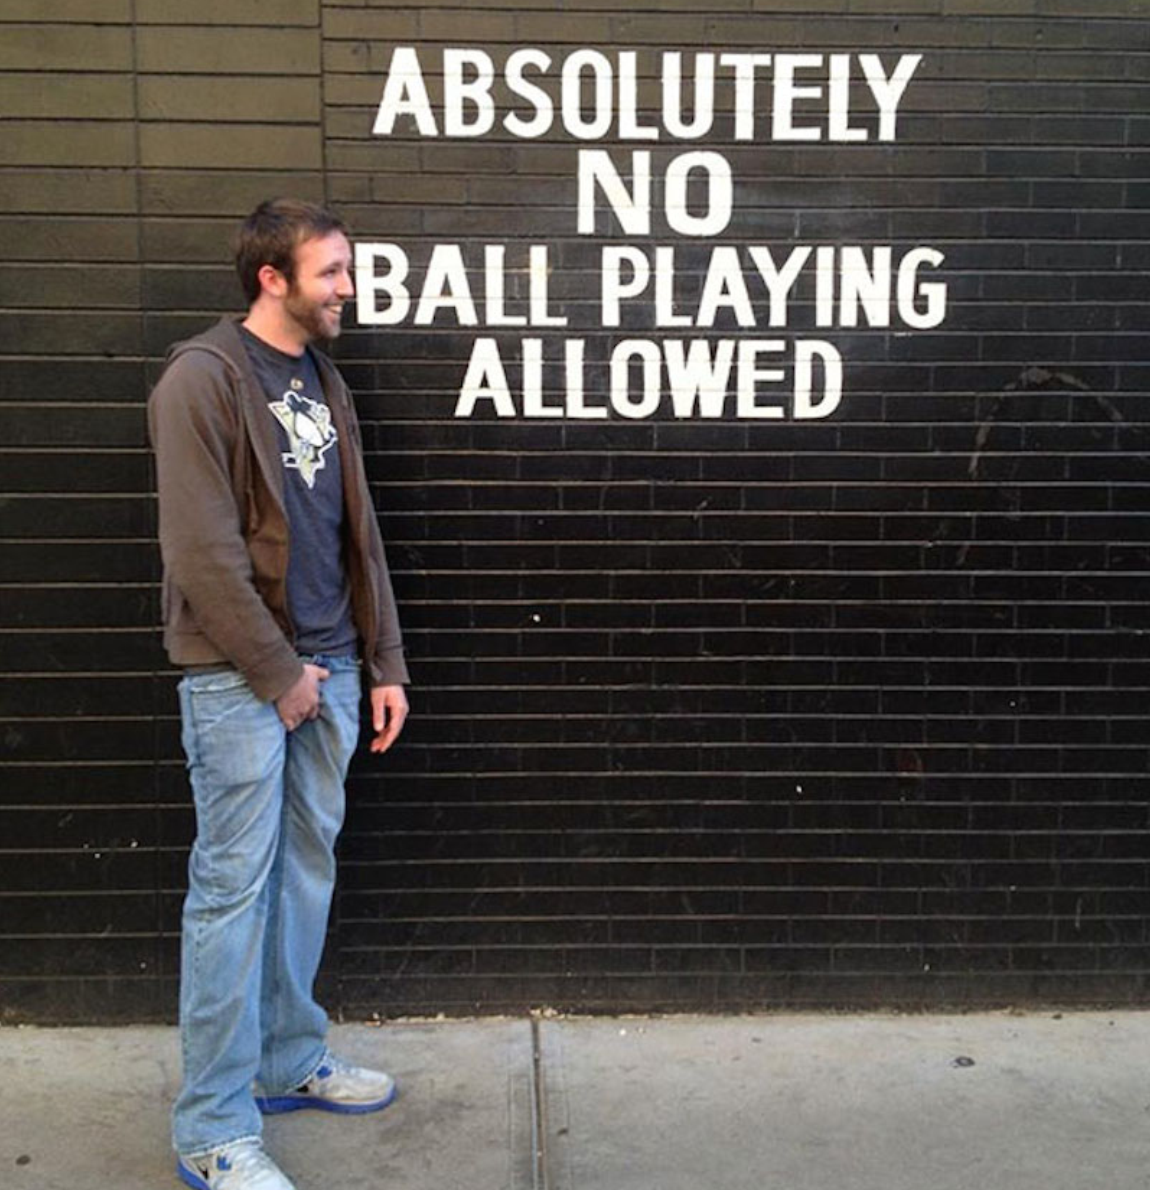 Absolutely no ball playing allowed.